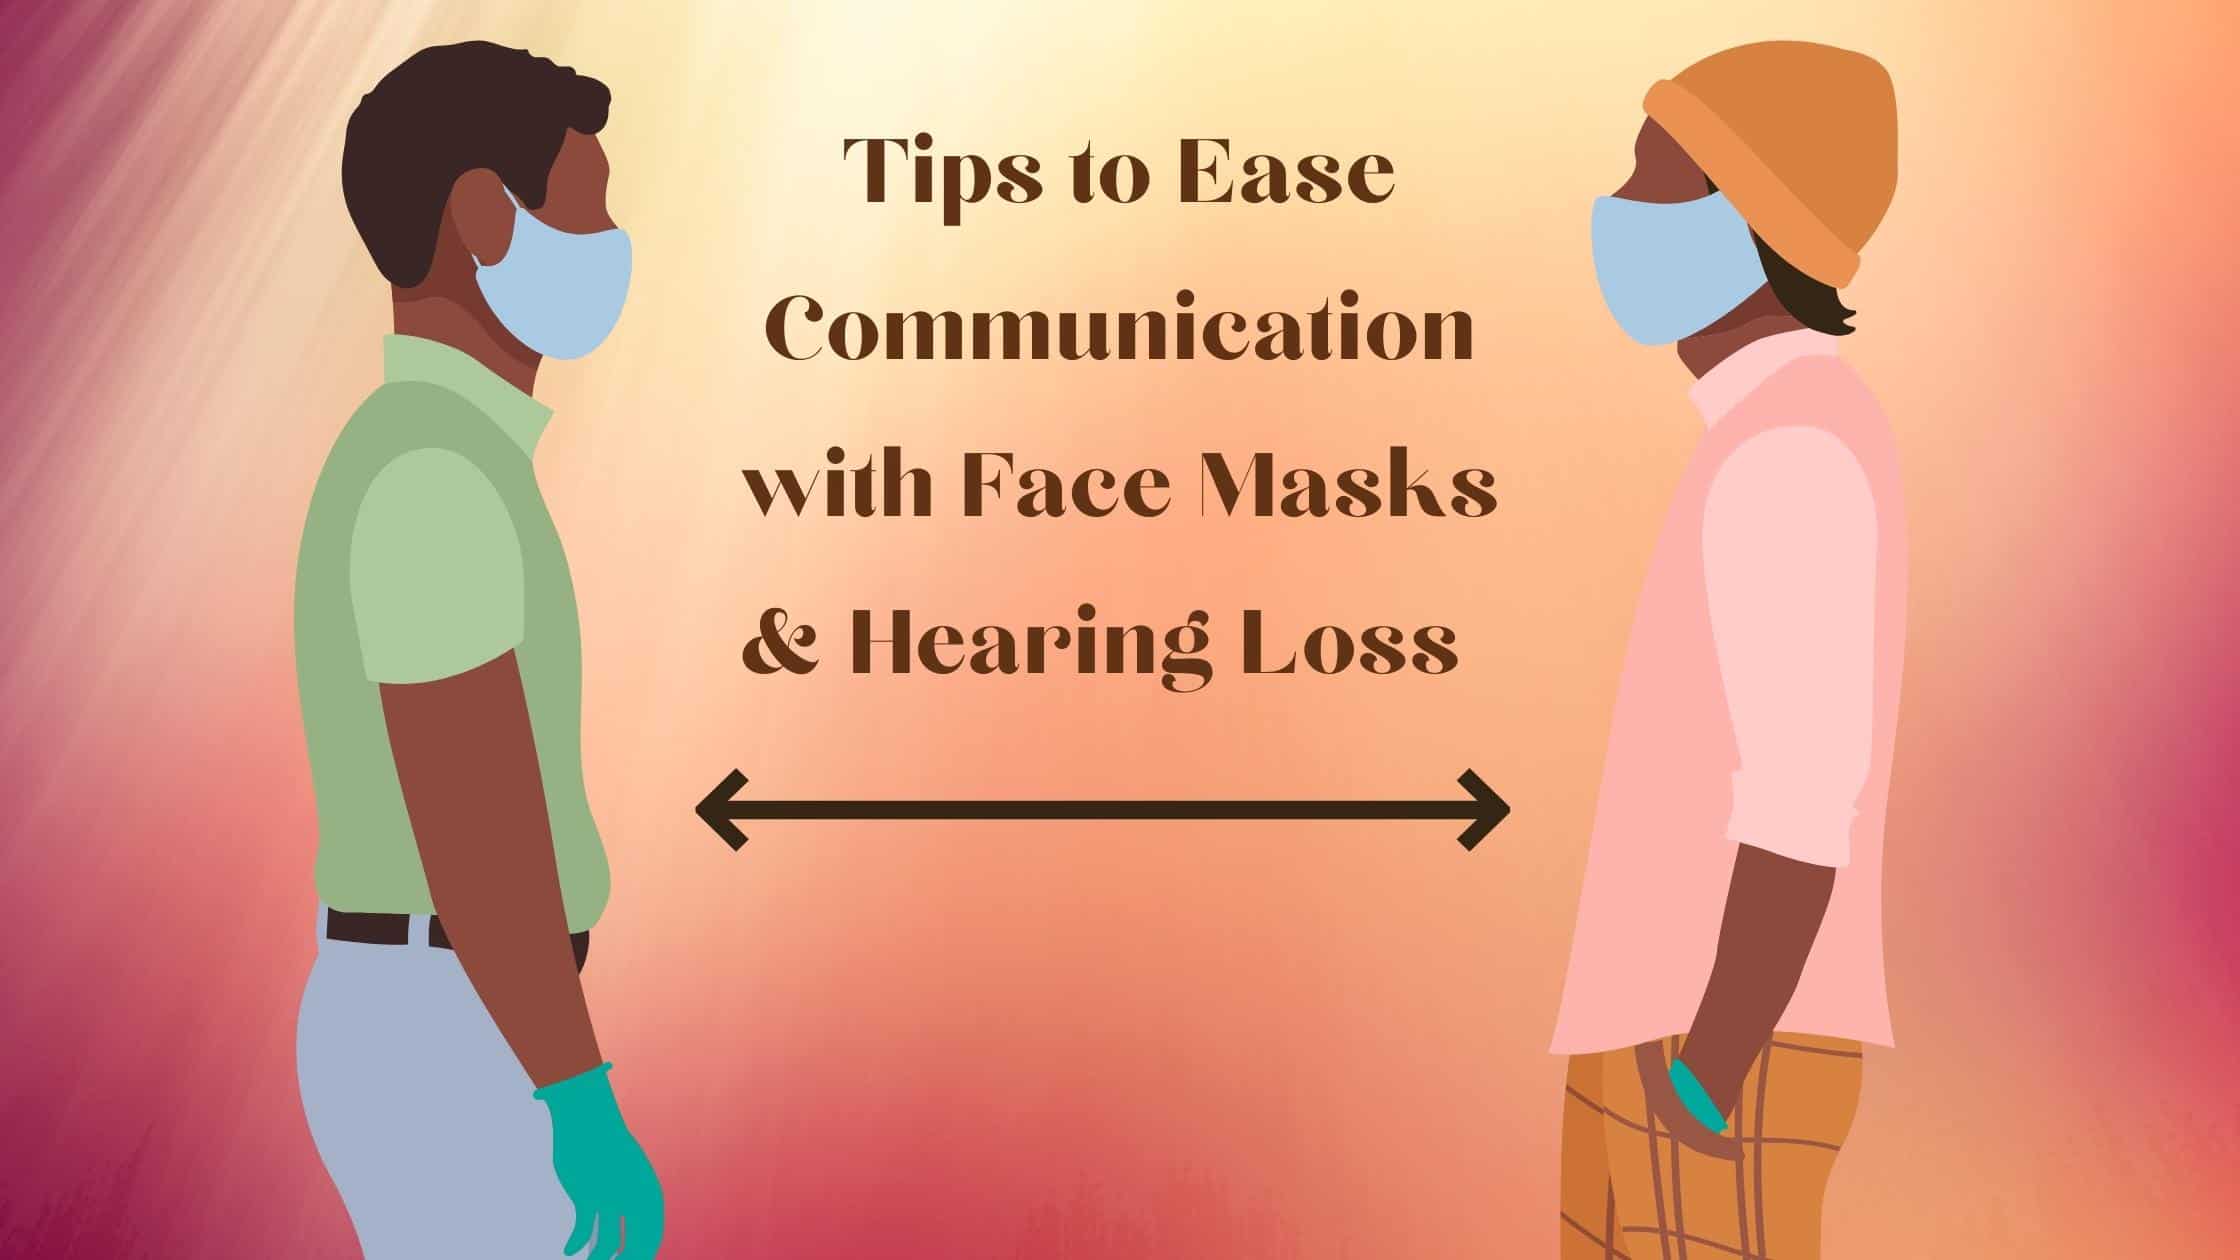 Tips to Ease Communication with Face Masks & Hearing Loss